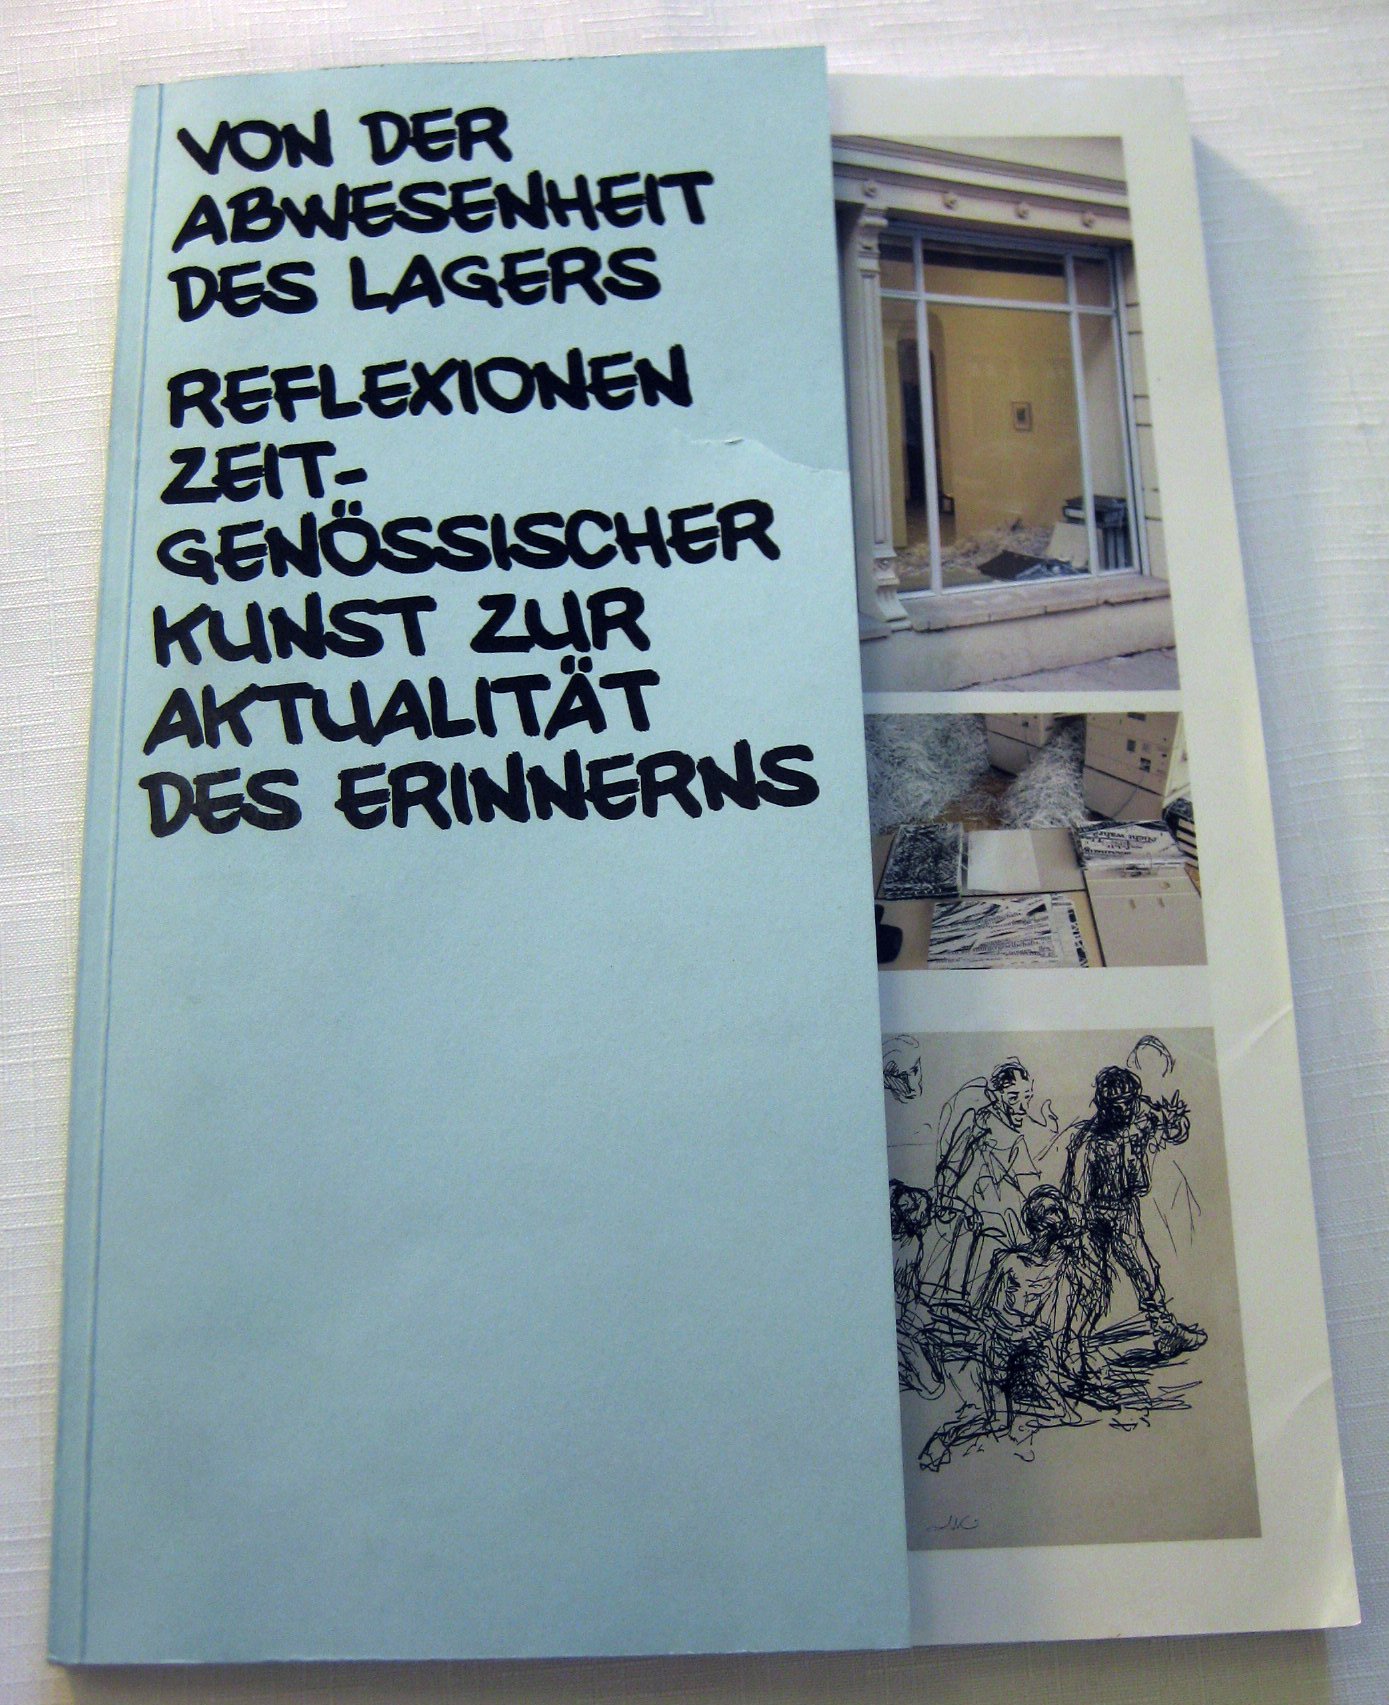 der aug cover side view.JPG